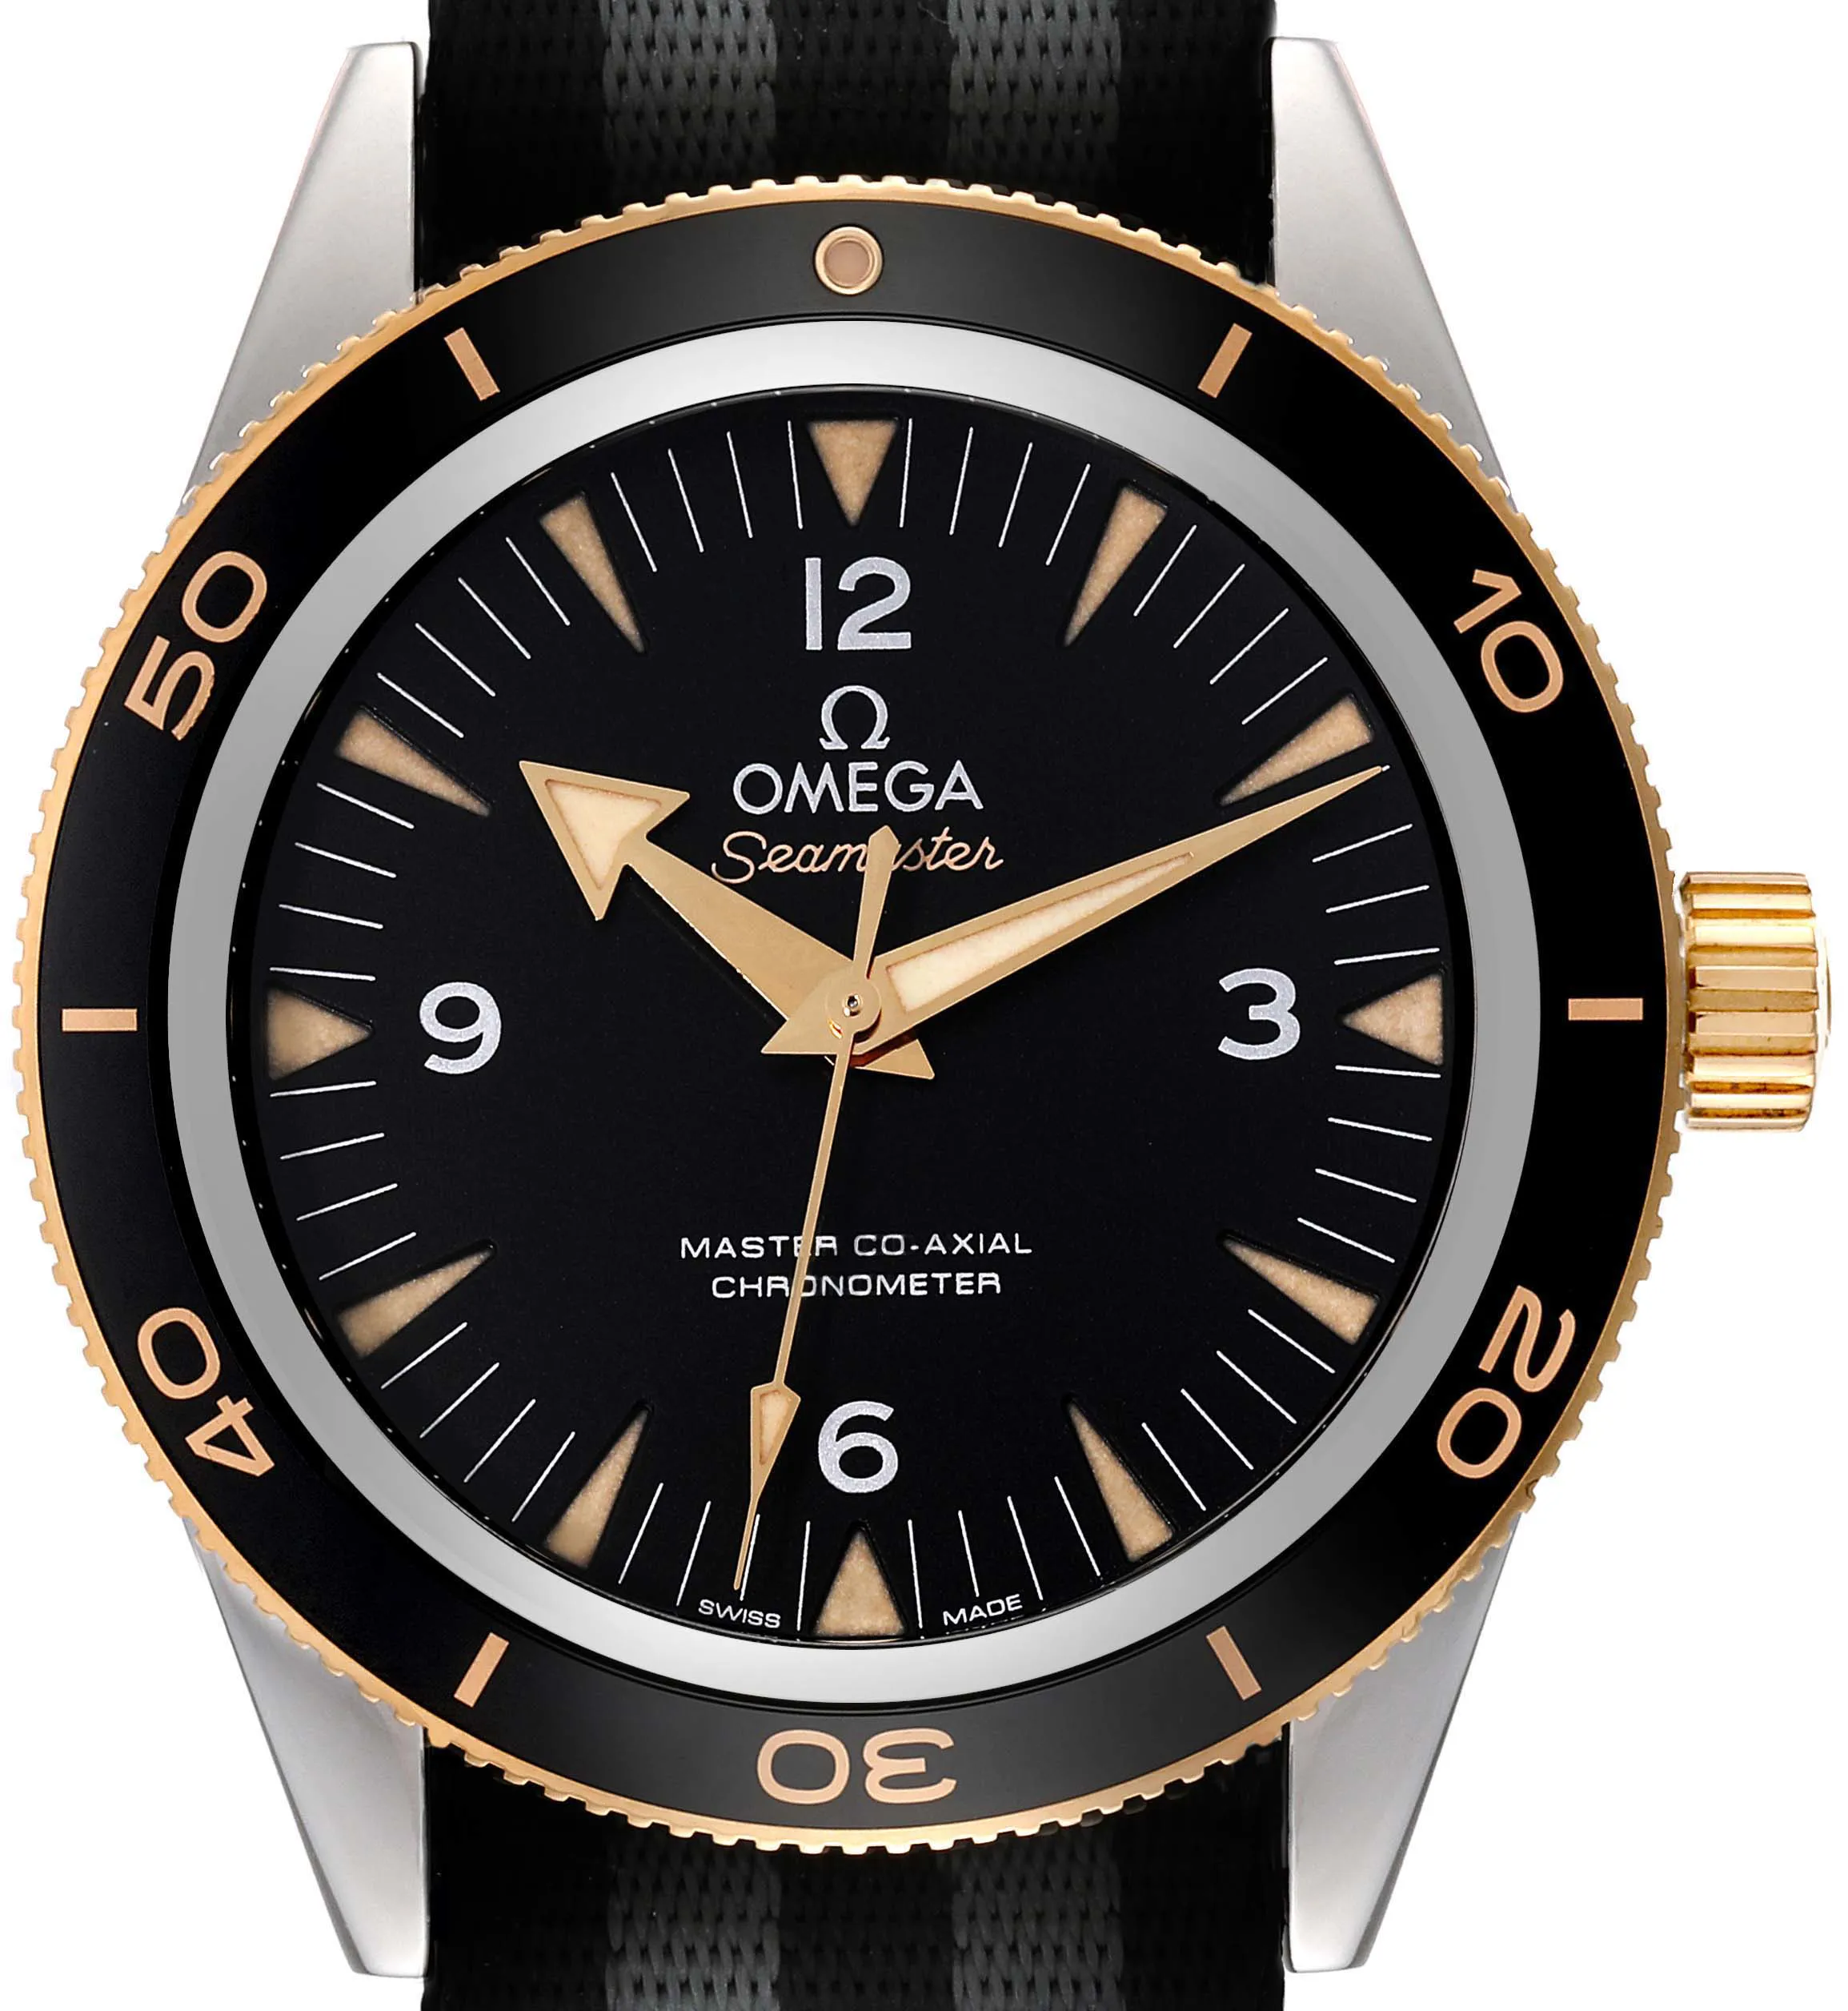 Omega Seamaster 300 233.22.41.21.01.001 41mm Yellow gold and stainless steel Sand-blasted black